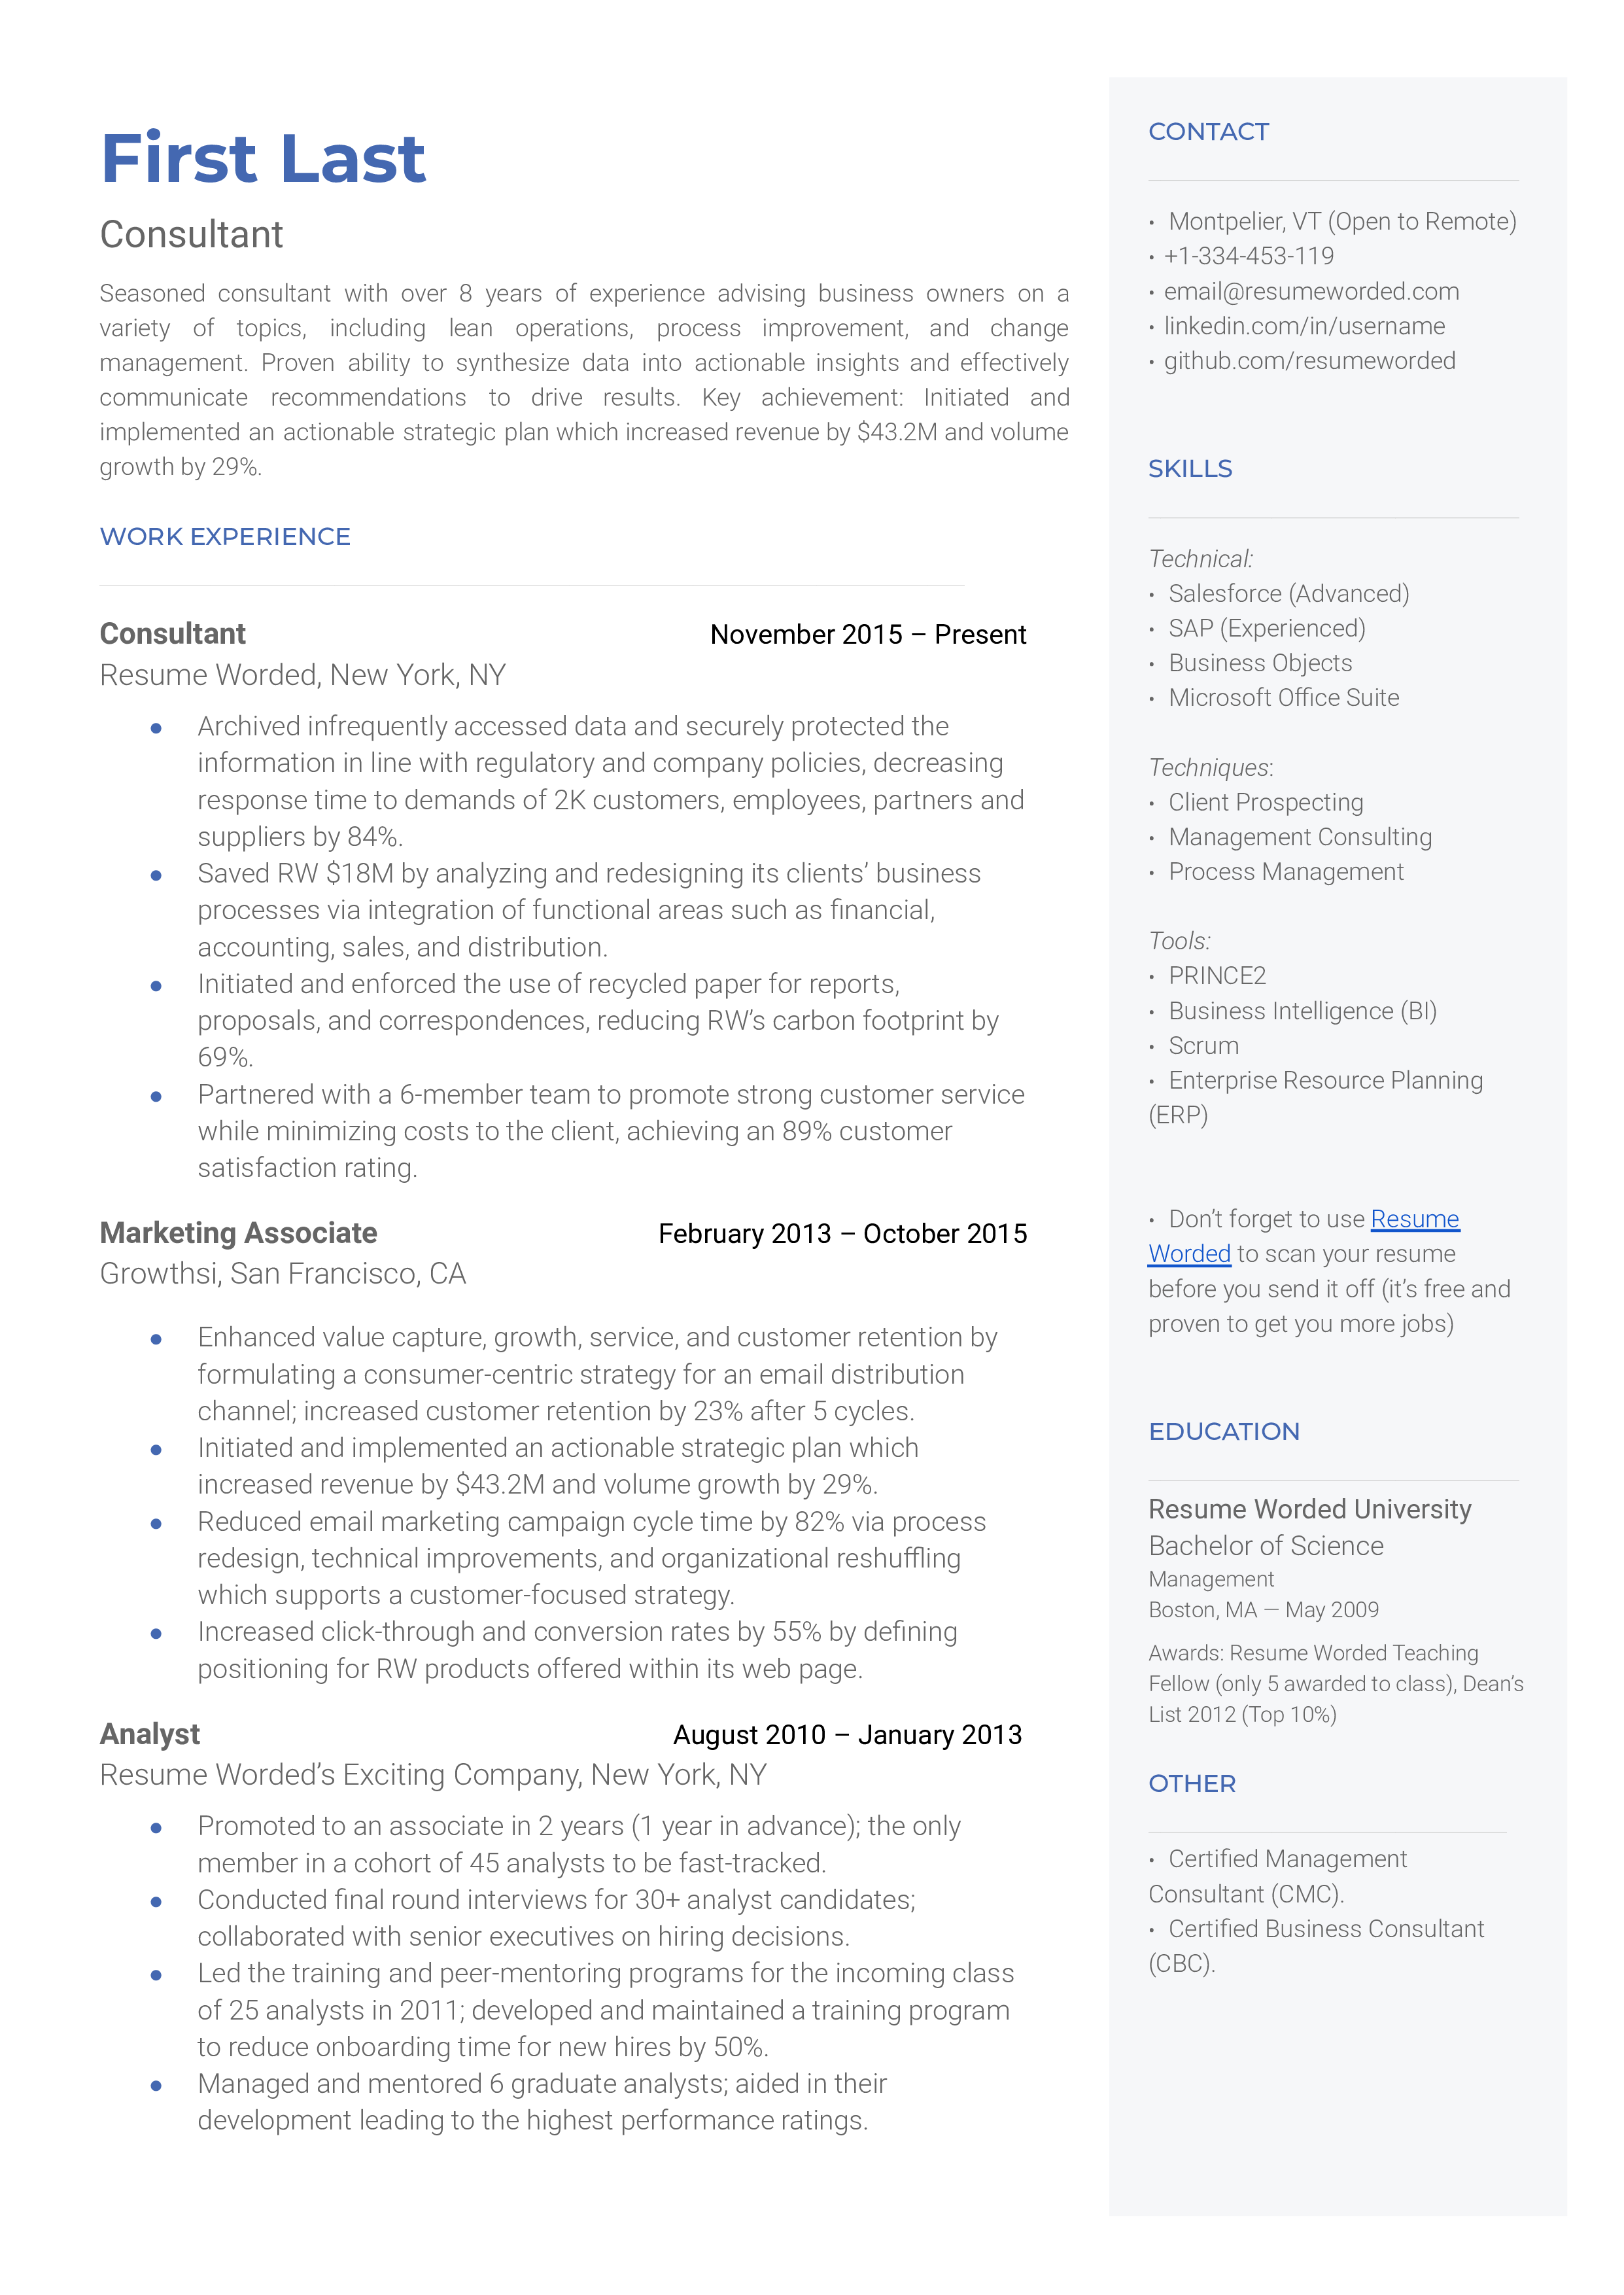 A consultant resume template including work experience, skills, and education